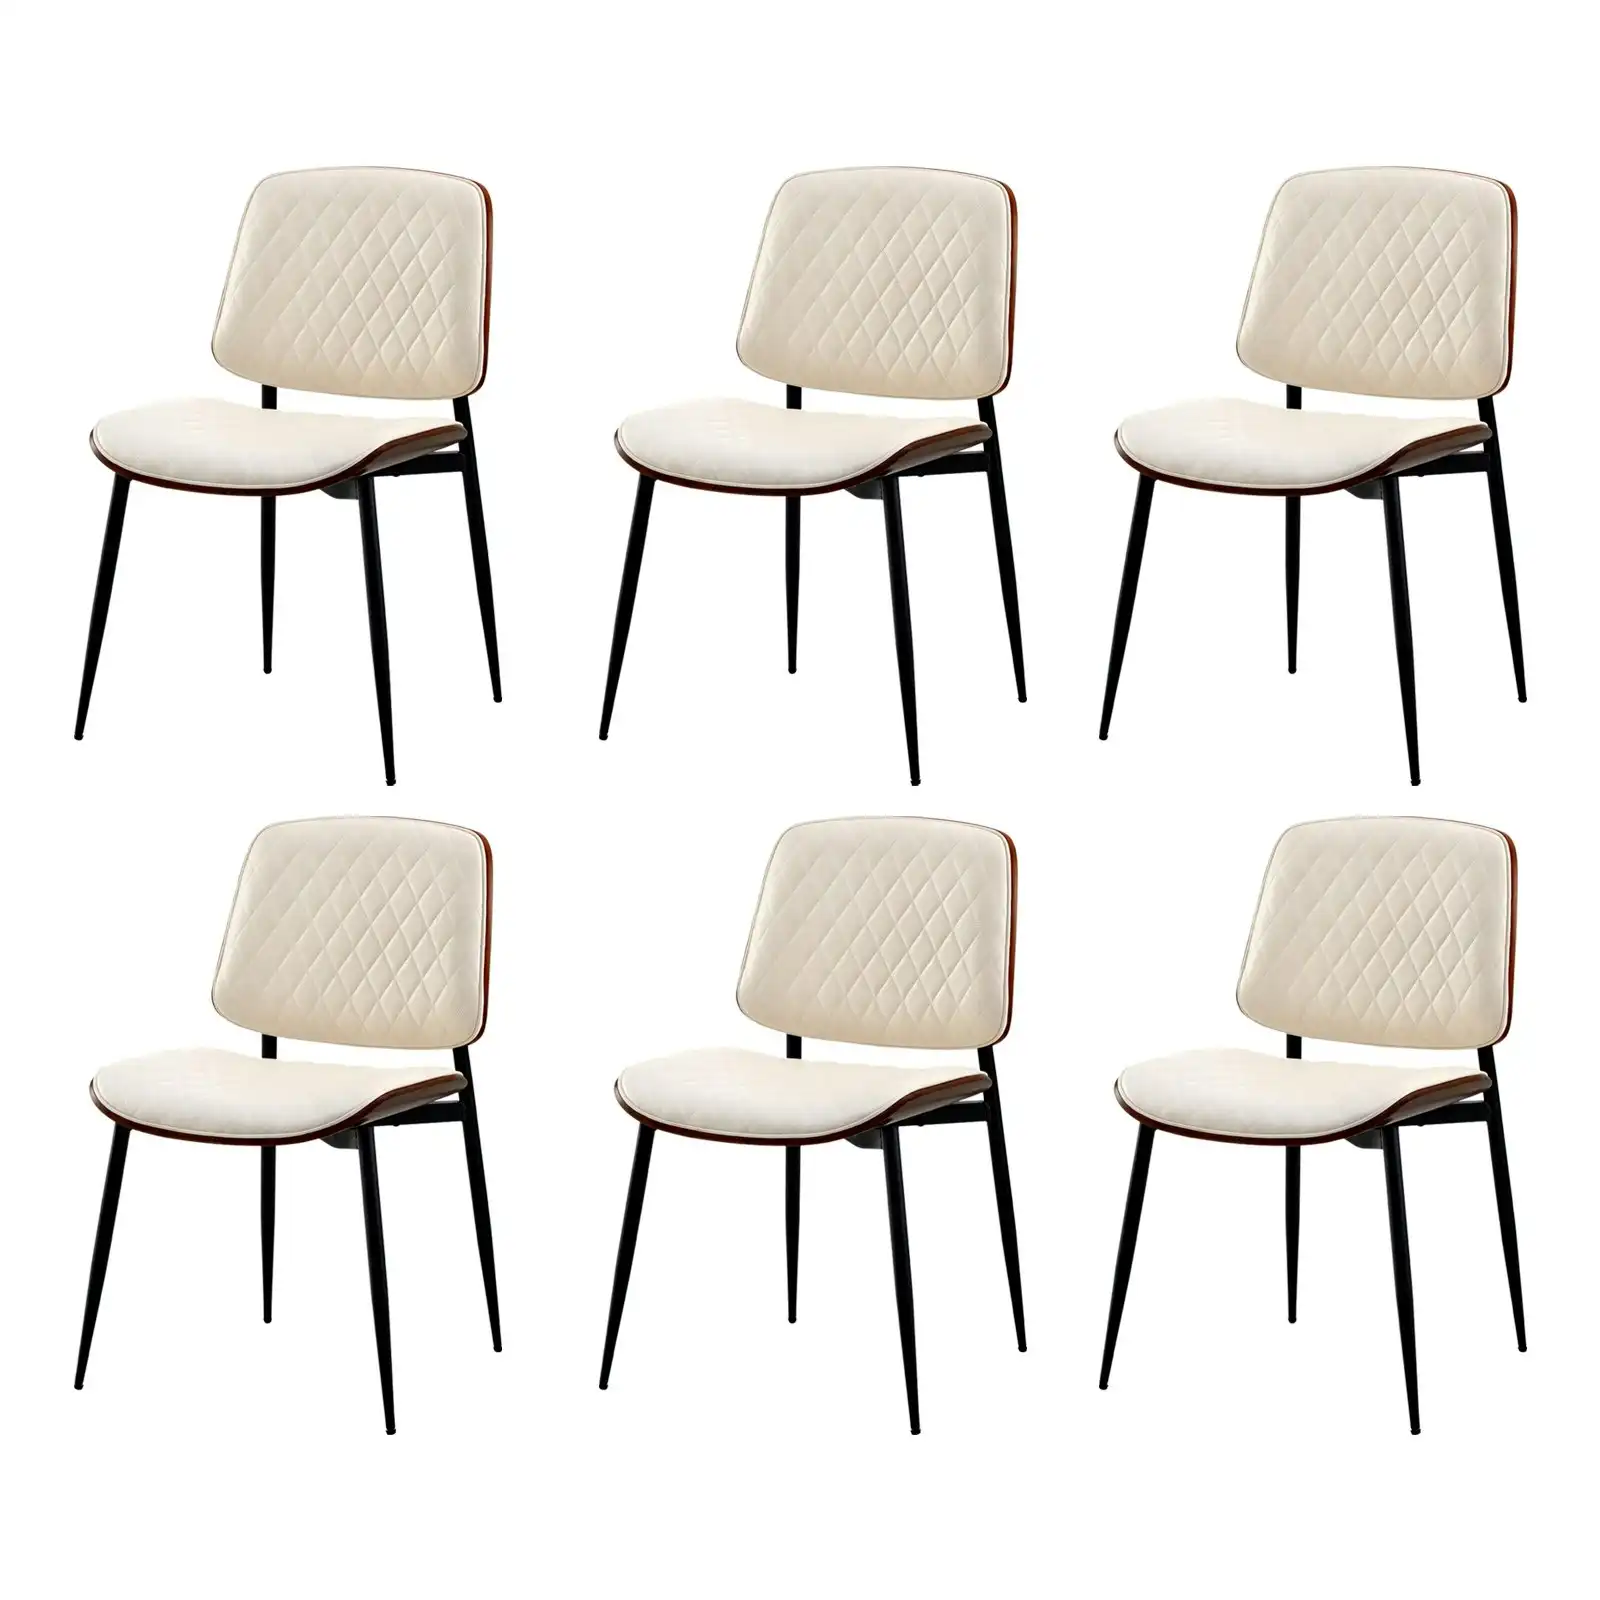 Oikiture 6x Dining Chairs Retro Faux Leather Solid Beech Wood Metal Legs White